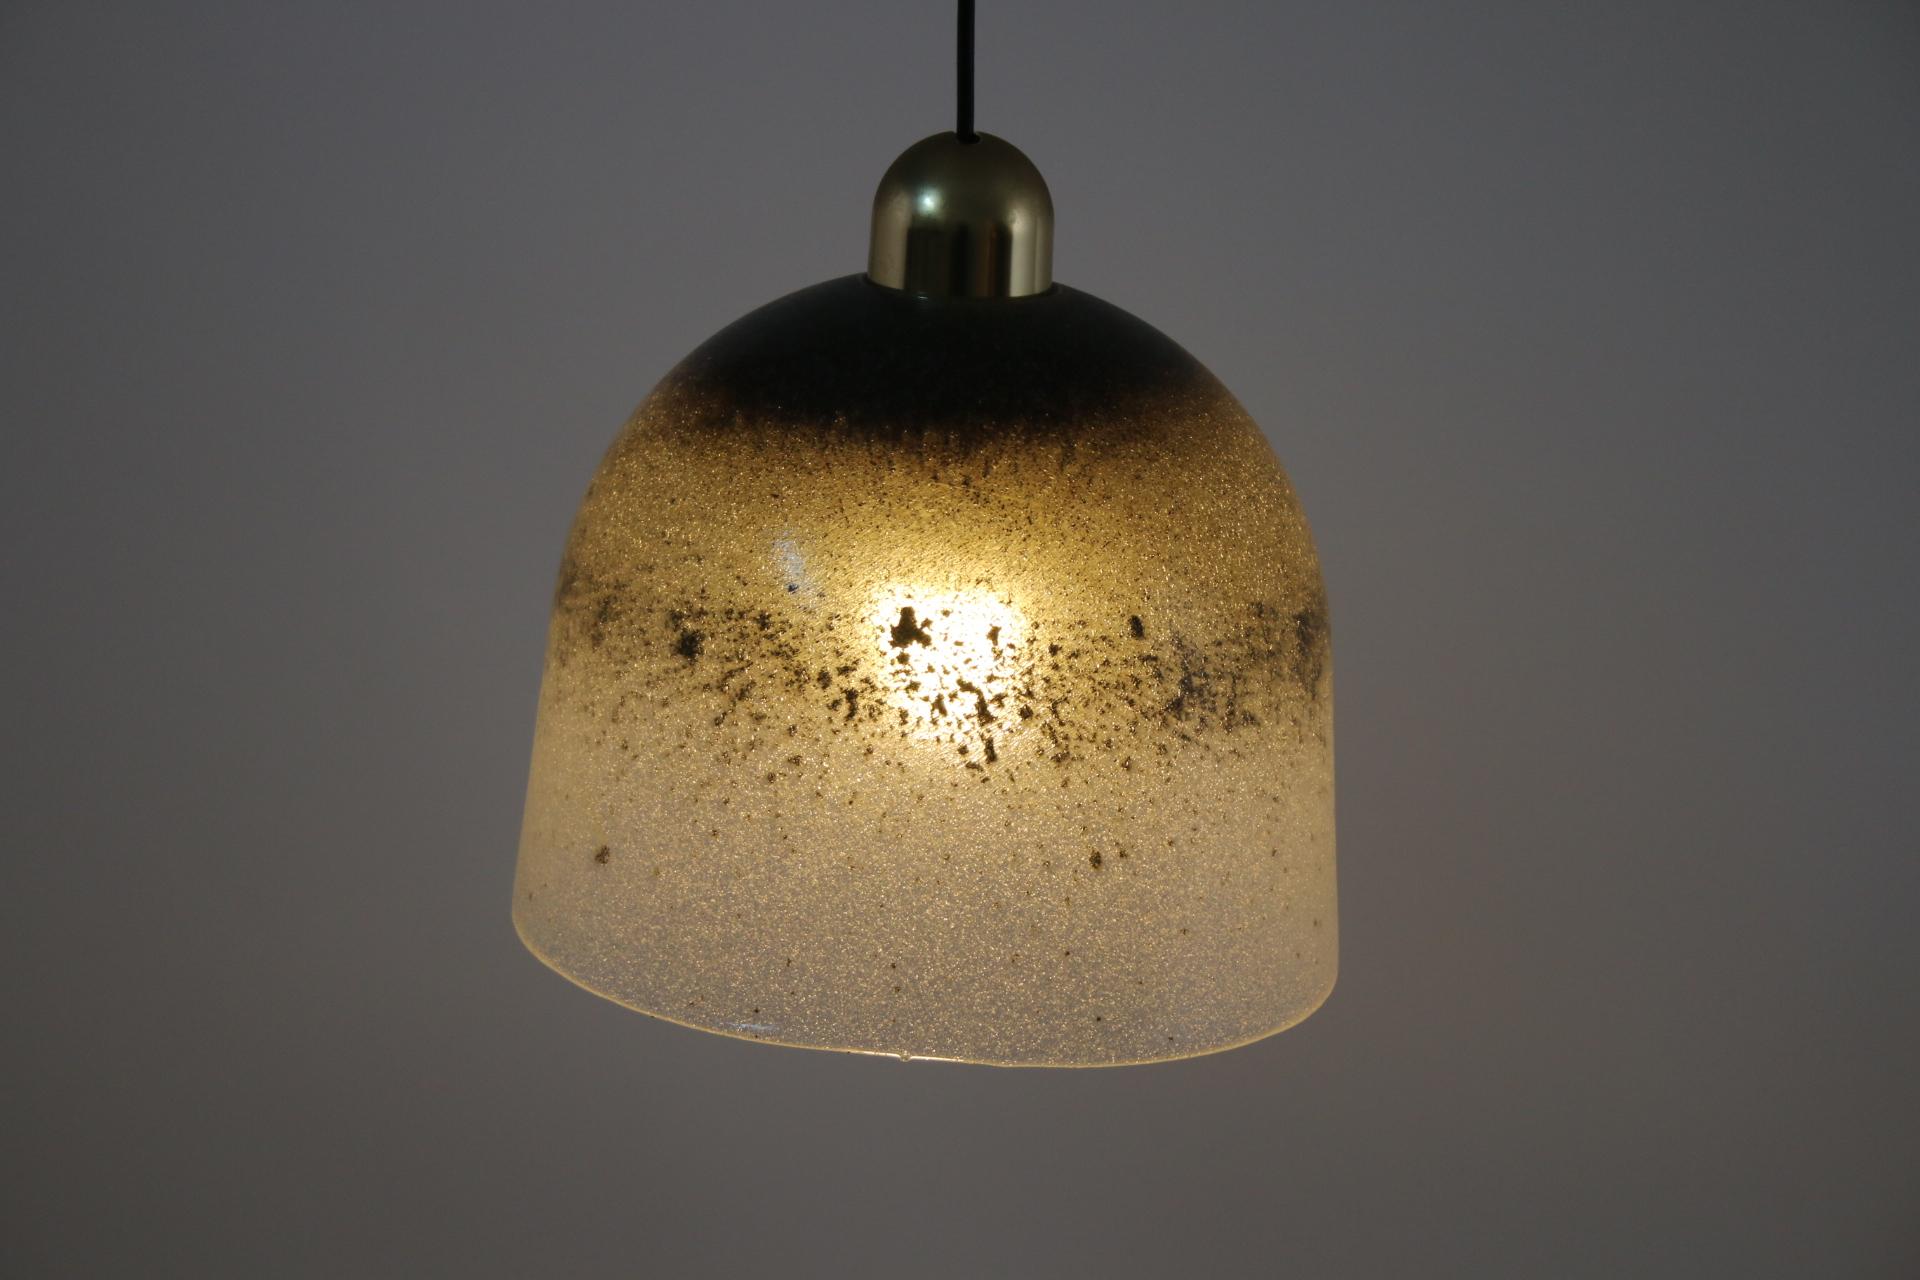 A pendant lamp made of very thick,

heavy glass full of fine bubbles painted in different shades,

reminiscent of the ocean.

When it is on, the lamp gives a very warm and special atmosphere to the room.

The lamp weighs at least 5 to 6 kg.